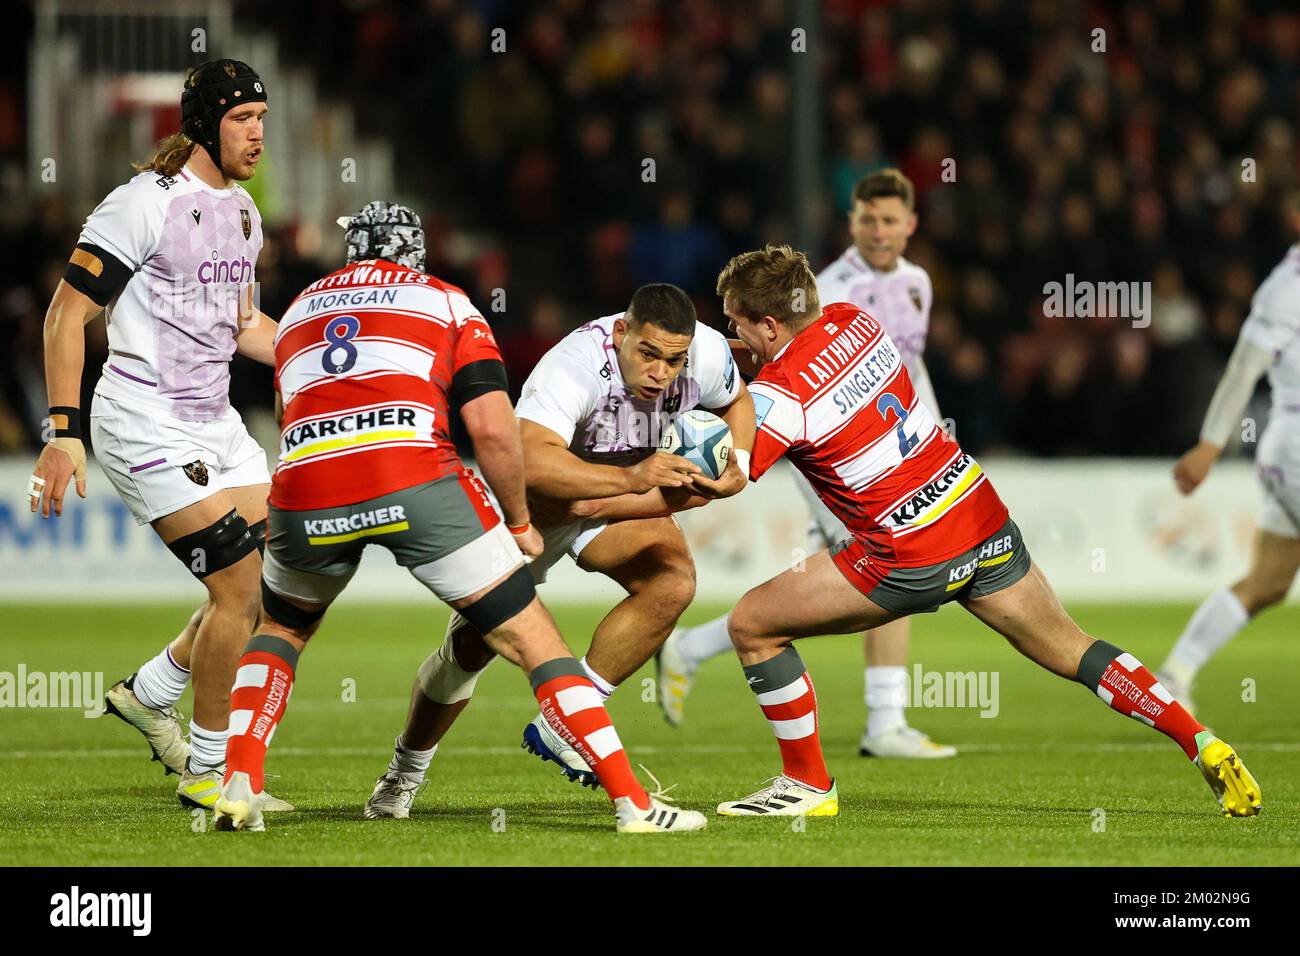 Sam Matavesi of Northampton Saints is tackled by Jack Singleton of Gloucester Rugby during the Gallagher Premiership match Gloucester Rugby vs Northampton Saints at Kingsholm Stadium , Gloucester, United Kingdom, 3rd December